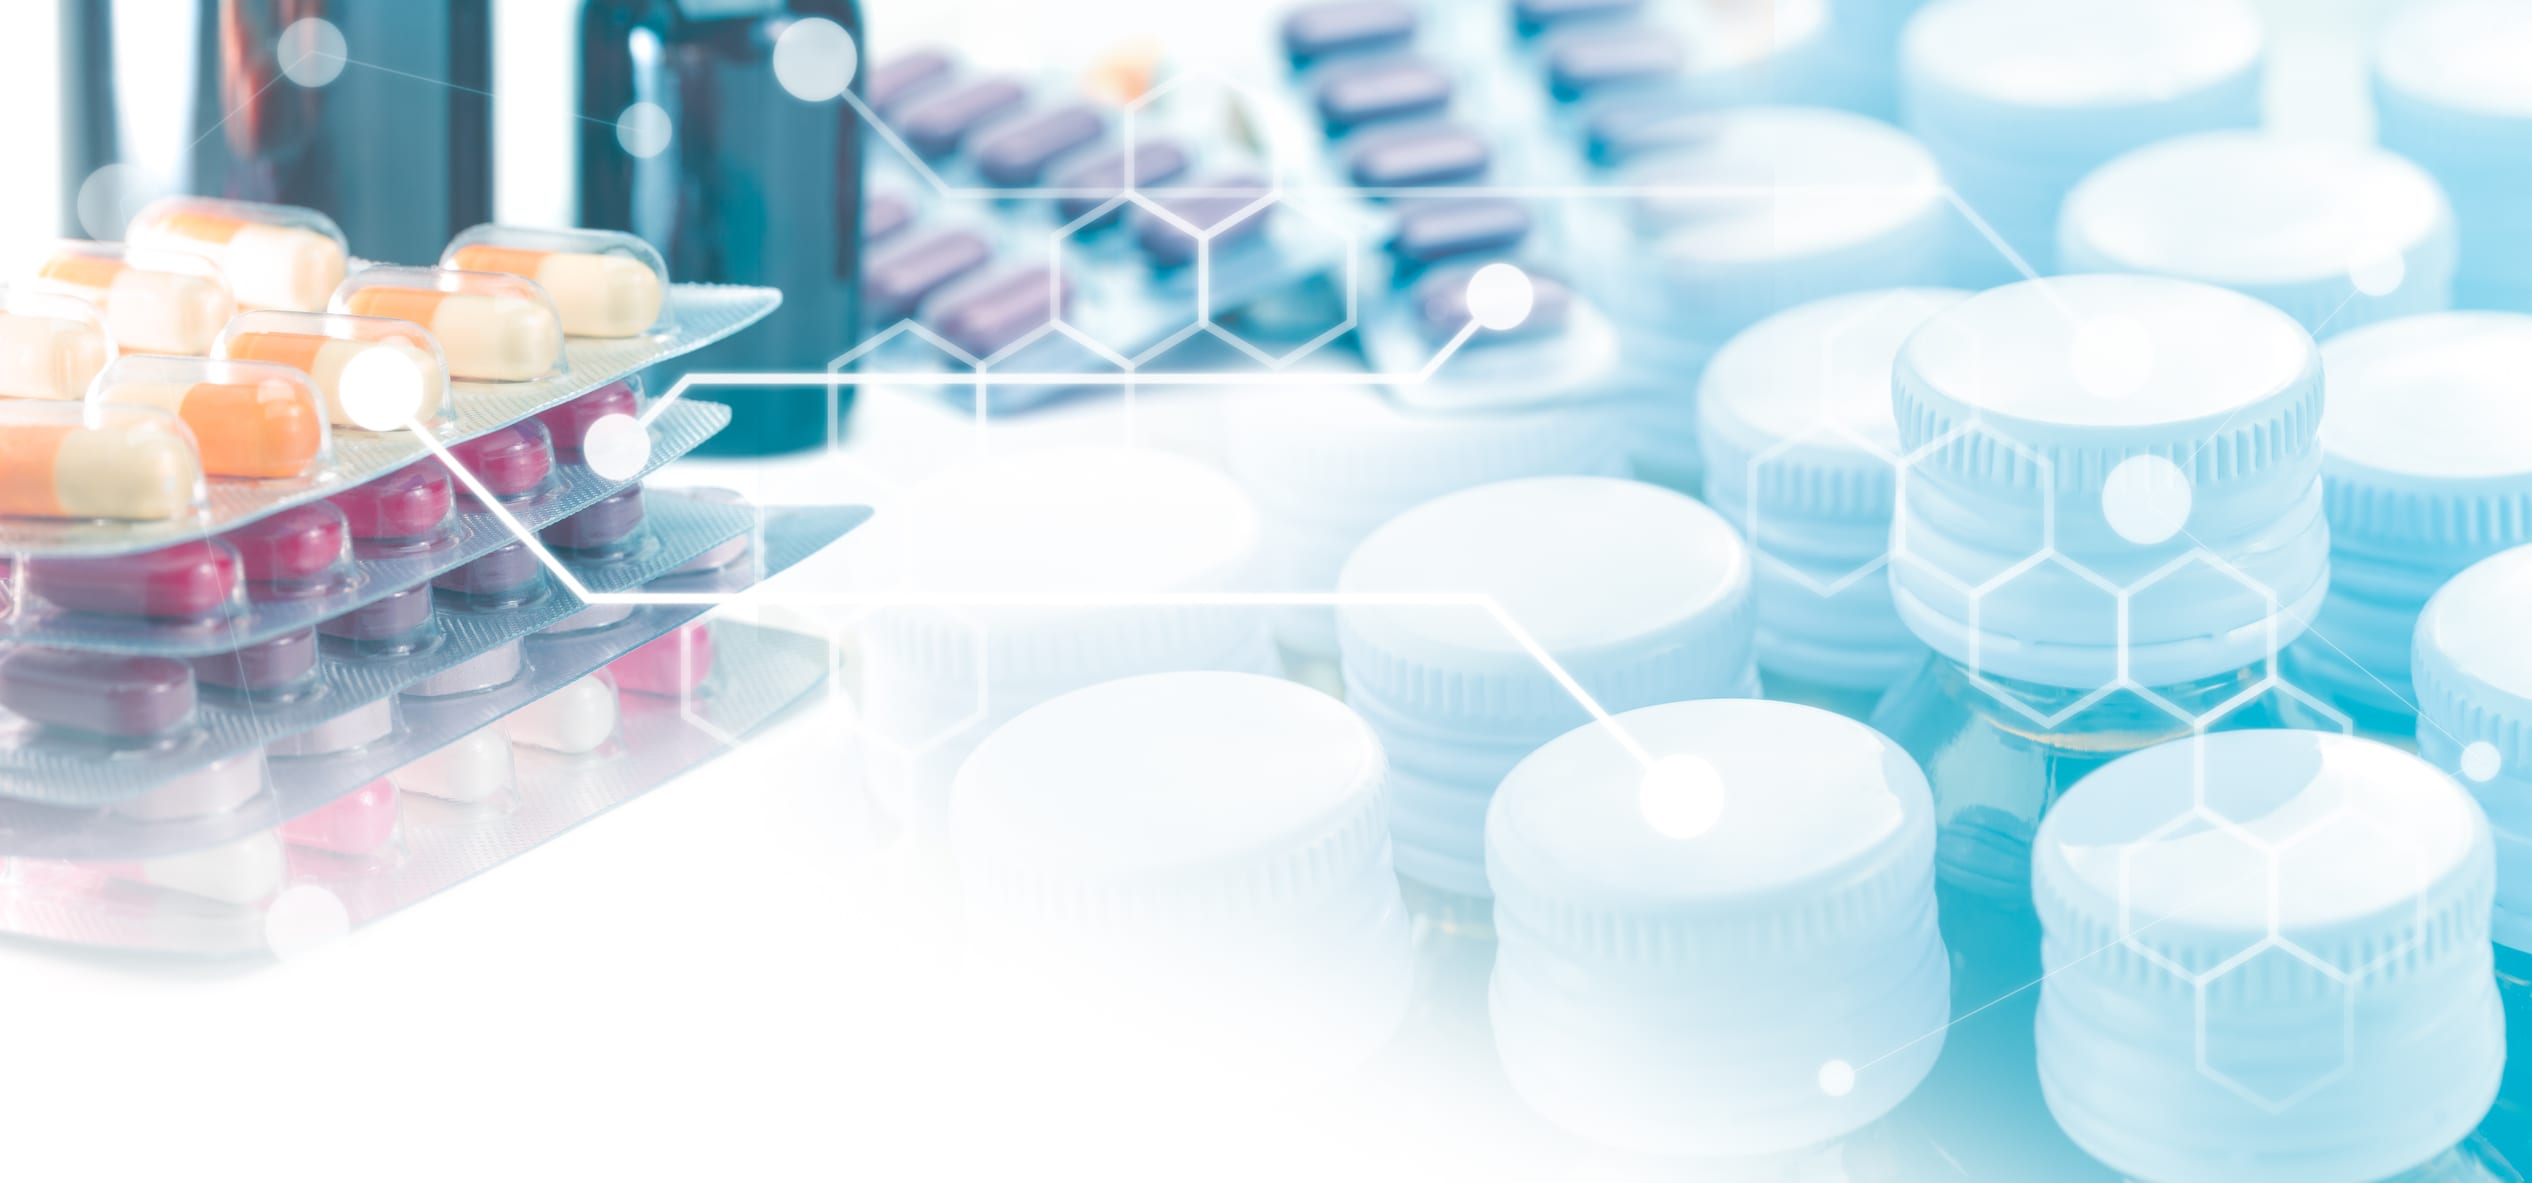 Are You Prepared for the Cybersecurity & Compliance Challenges Facing Pharmaceutical Companies?